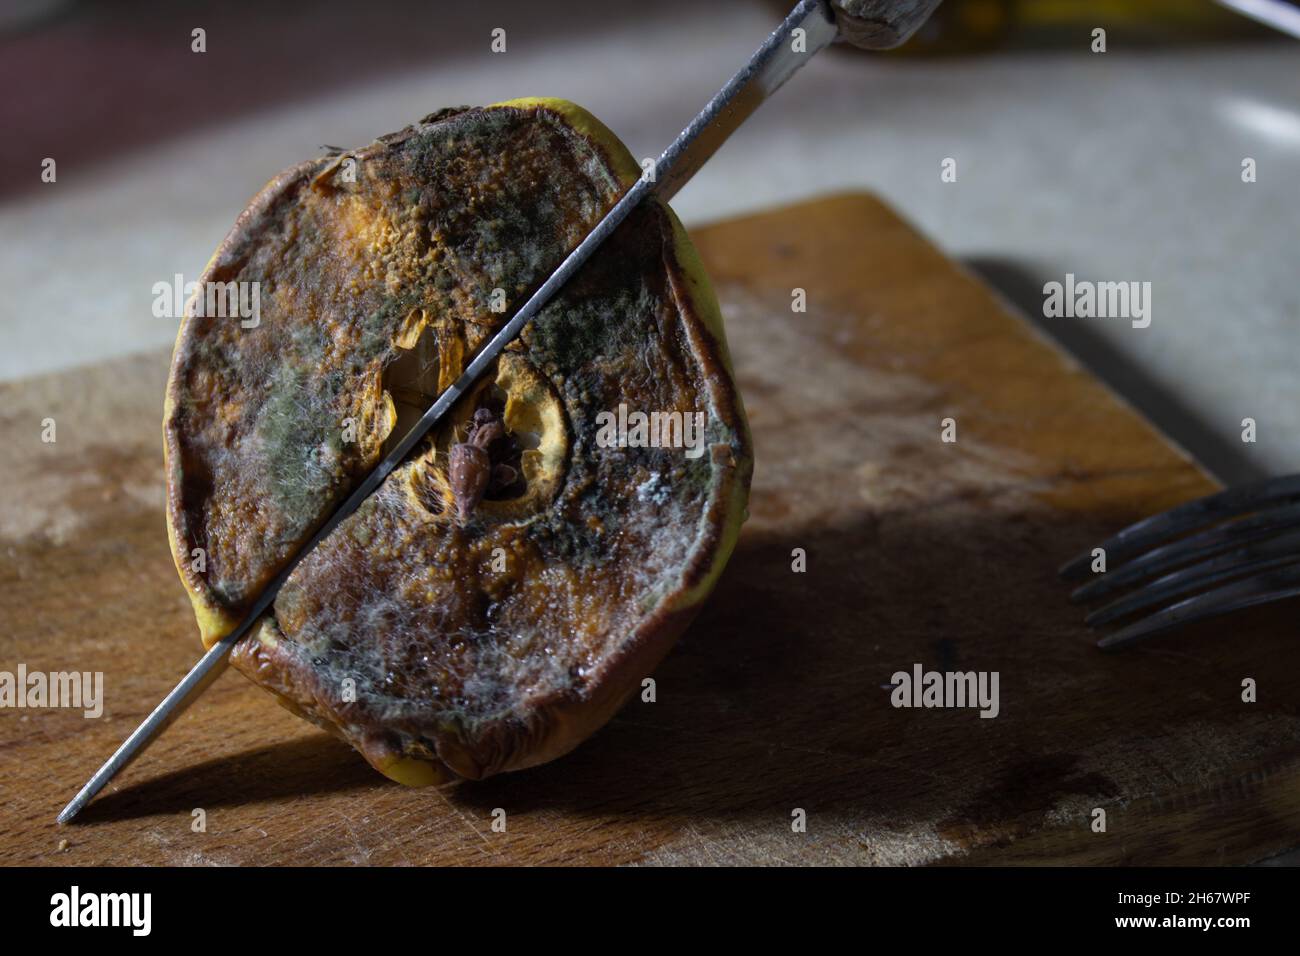 Moldy quince stabbed with a knife on a wooden cutting board Stock Photo